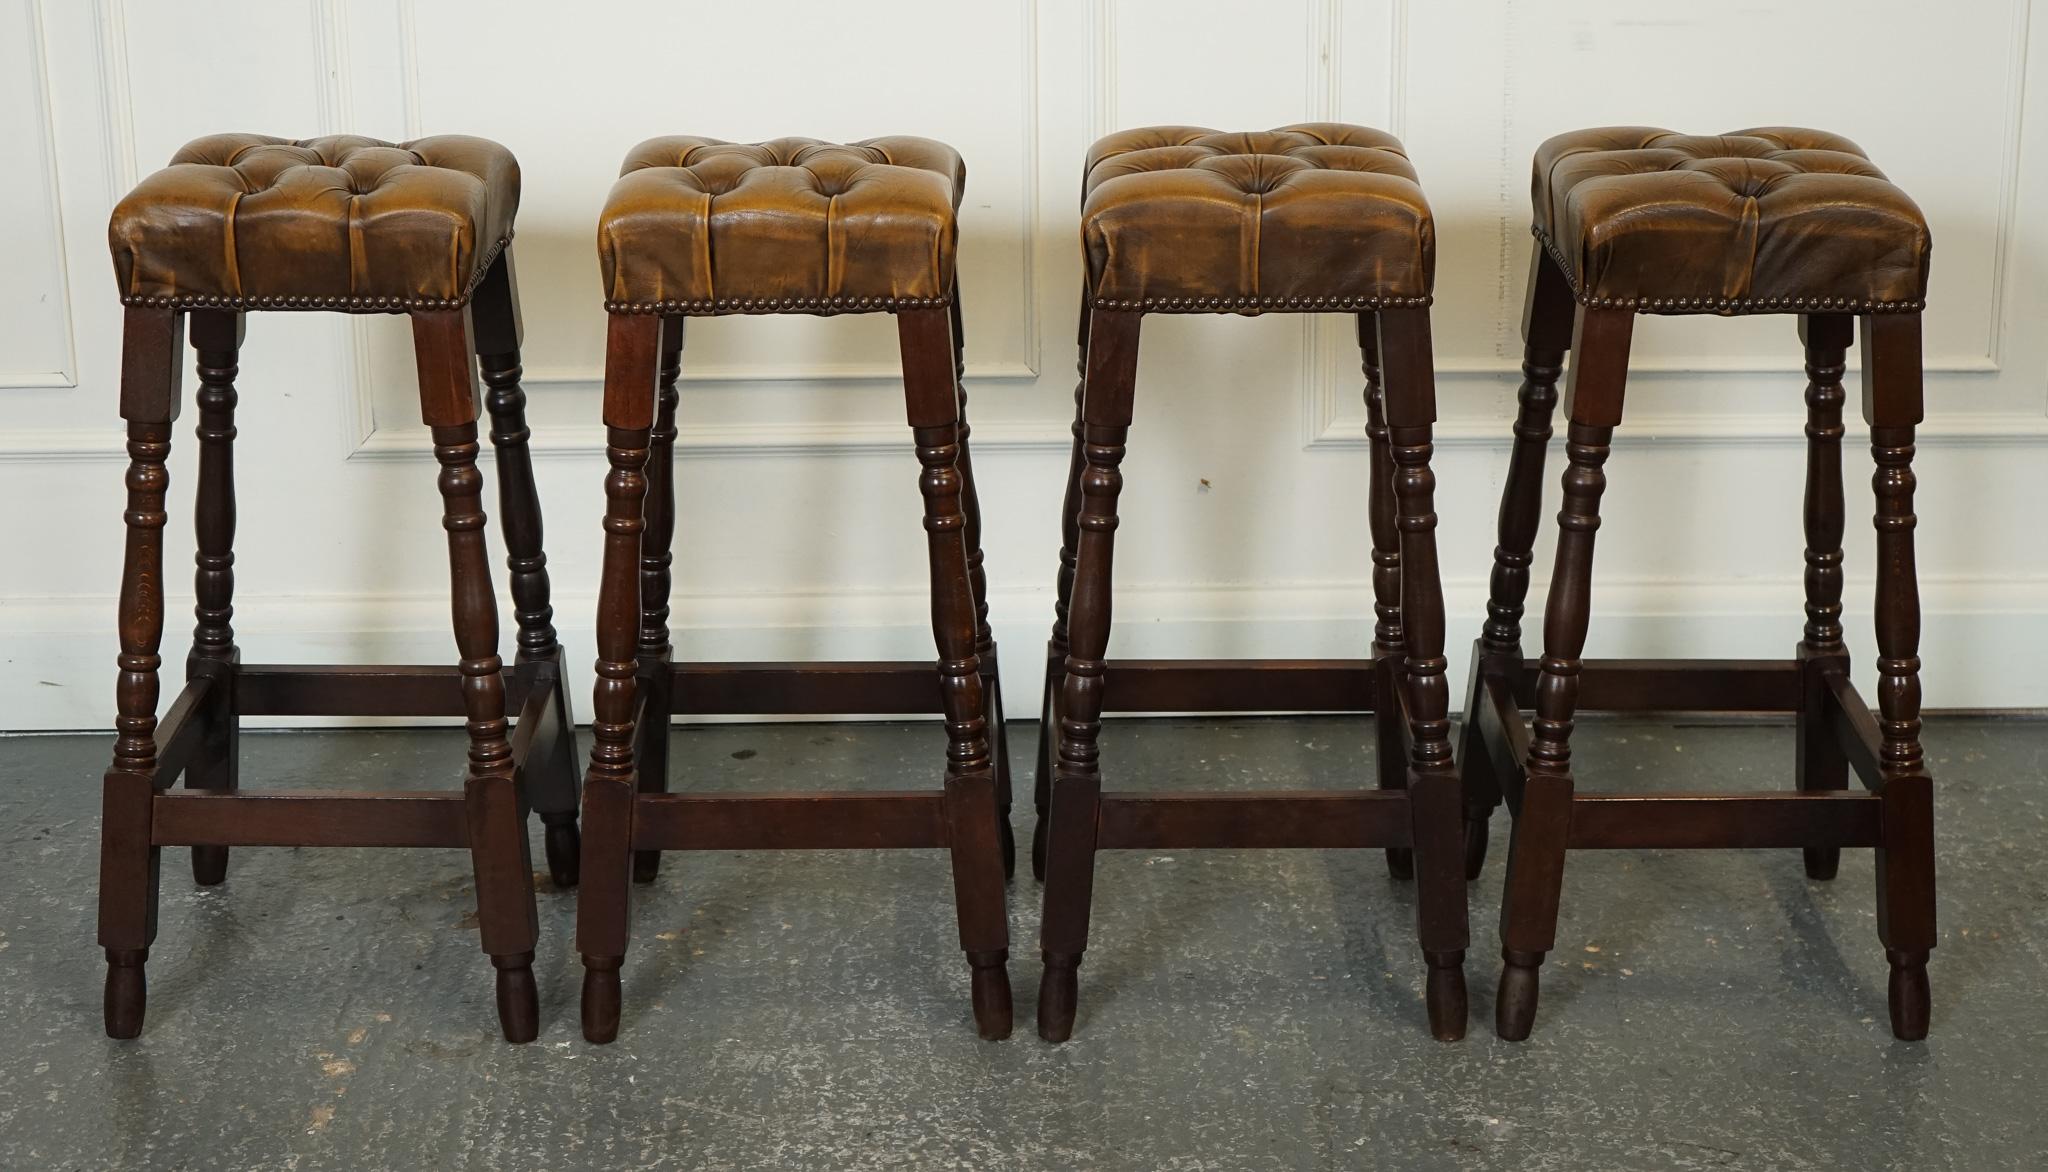 Antiques of London



We are delighted to offer for sale this Lovely Set of Four Leather Chesterfield Bar Stools.

A set of four brown leather Chesterfield bar stools offers a stylish and comfortable seating solution for a bar or kitchen area. These